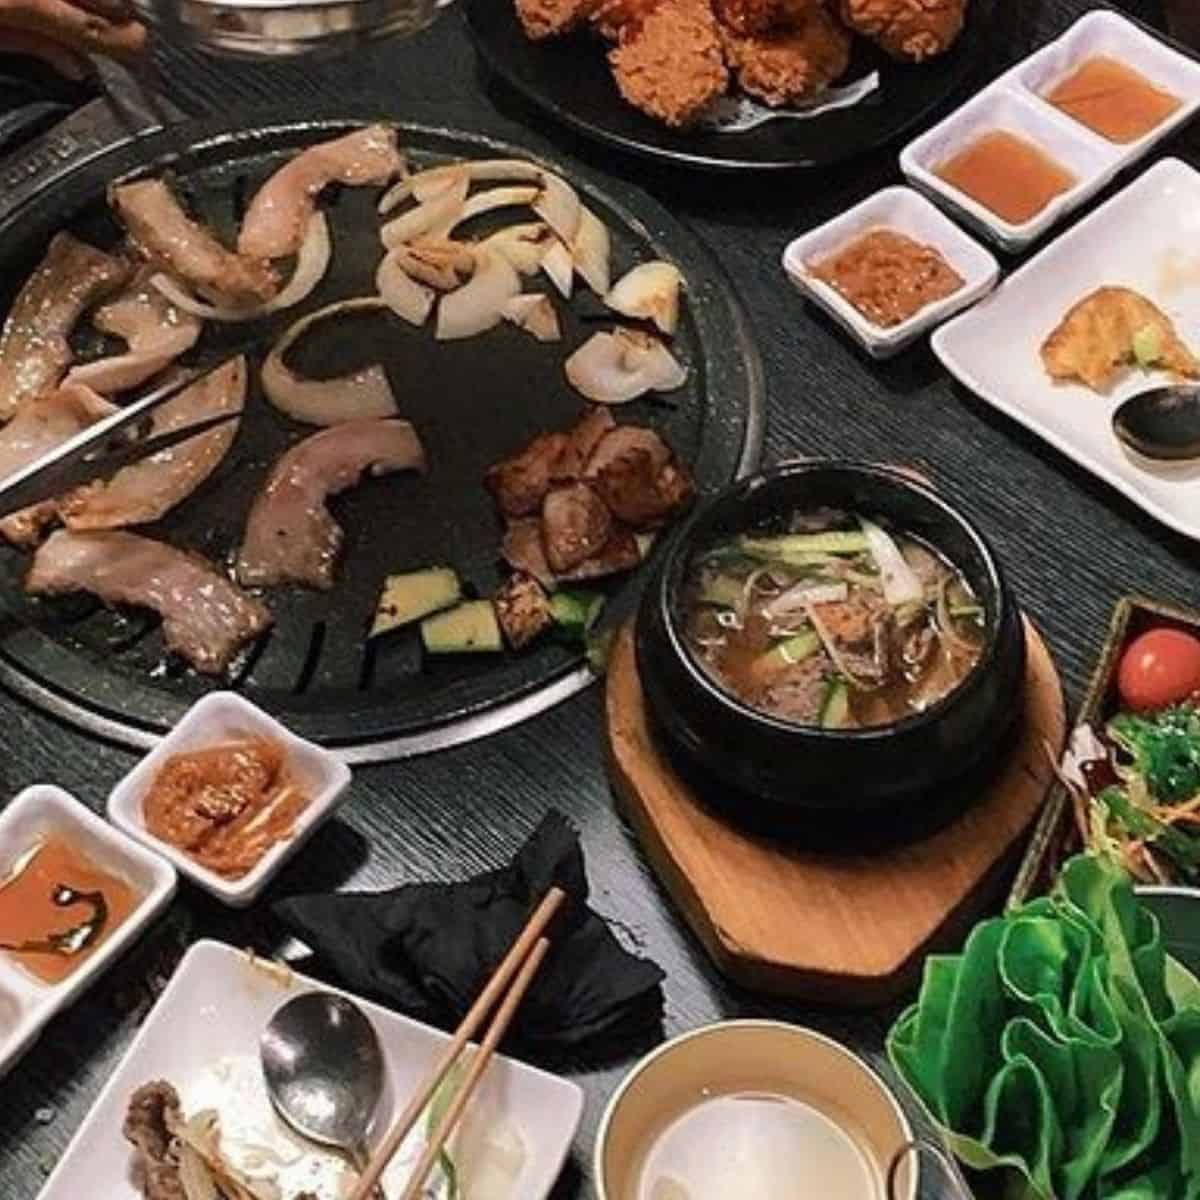 Gogi Korean BBQ in London perfect place to enjoy barbecue with friends